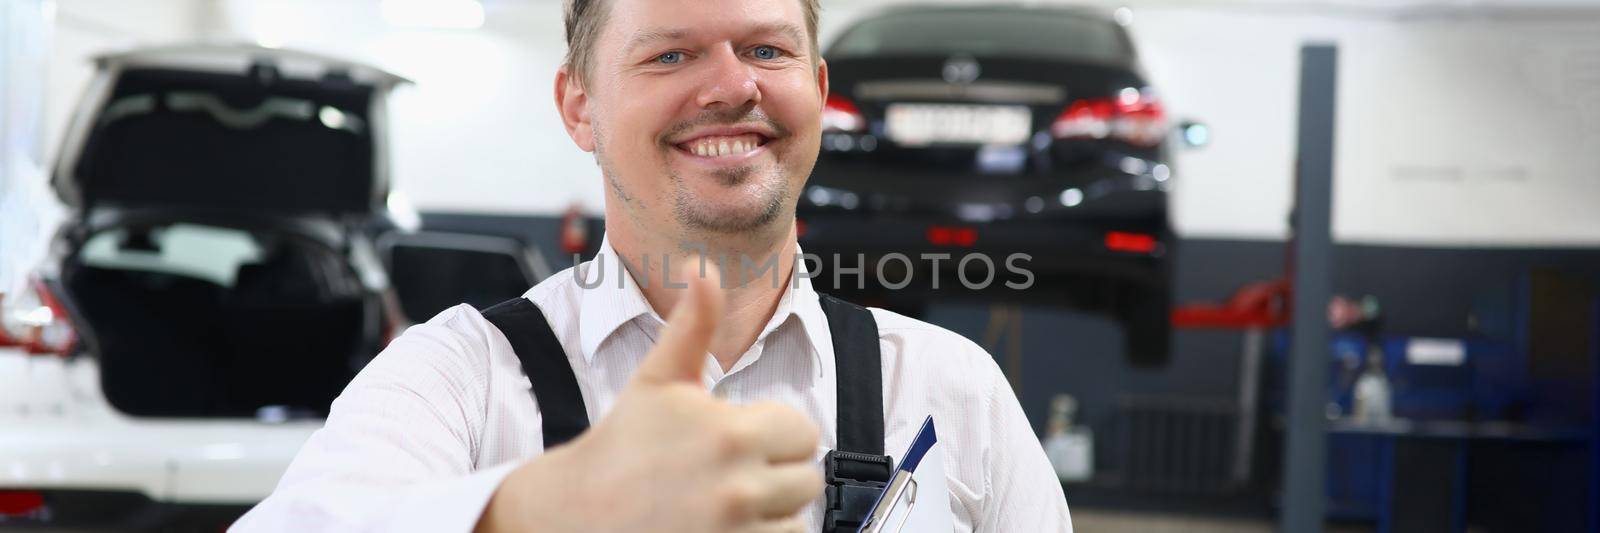 Portrait of a young smiling car mechanic holding thumbs up in car repair shop by kuprevich